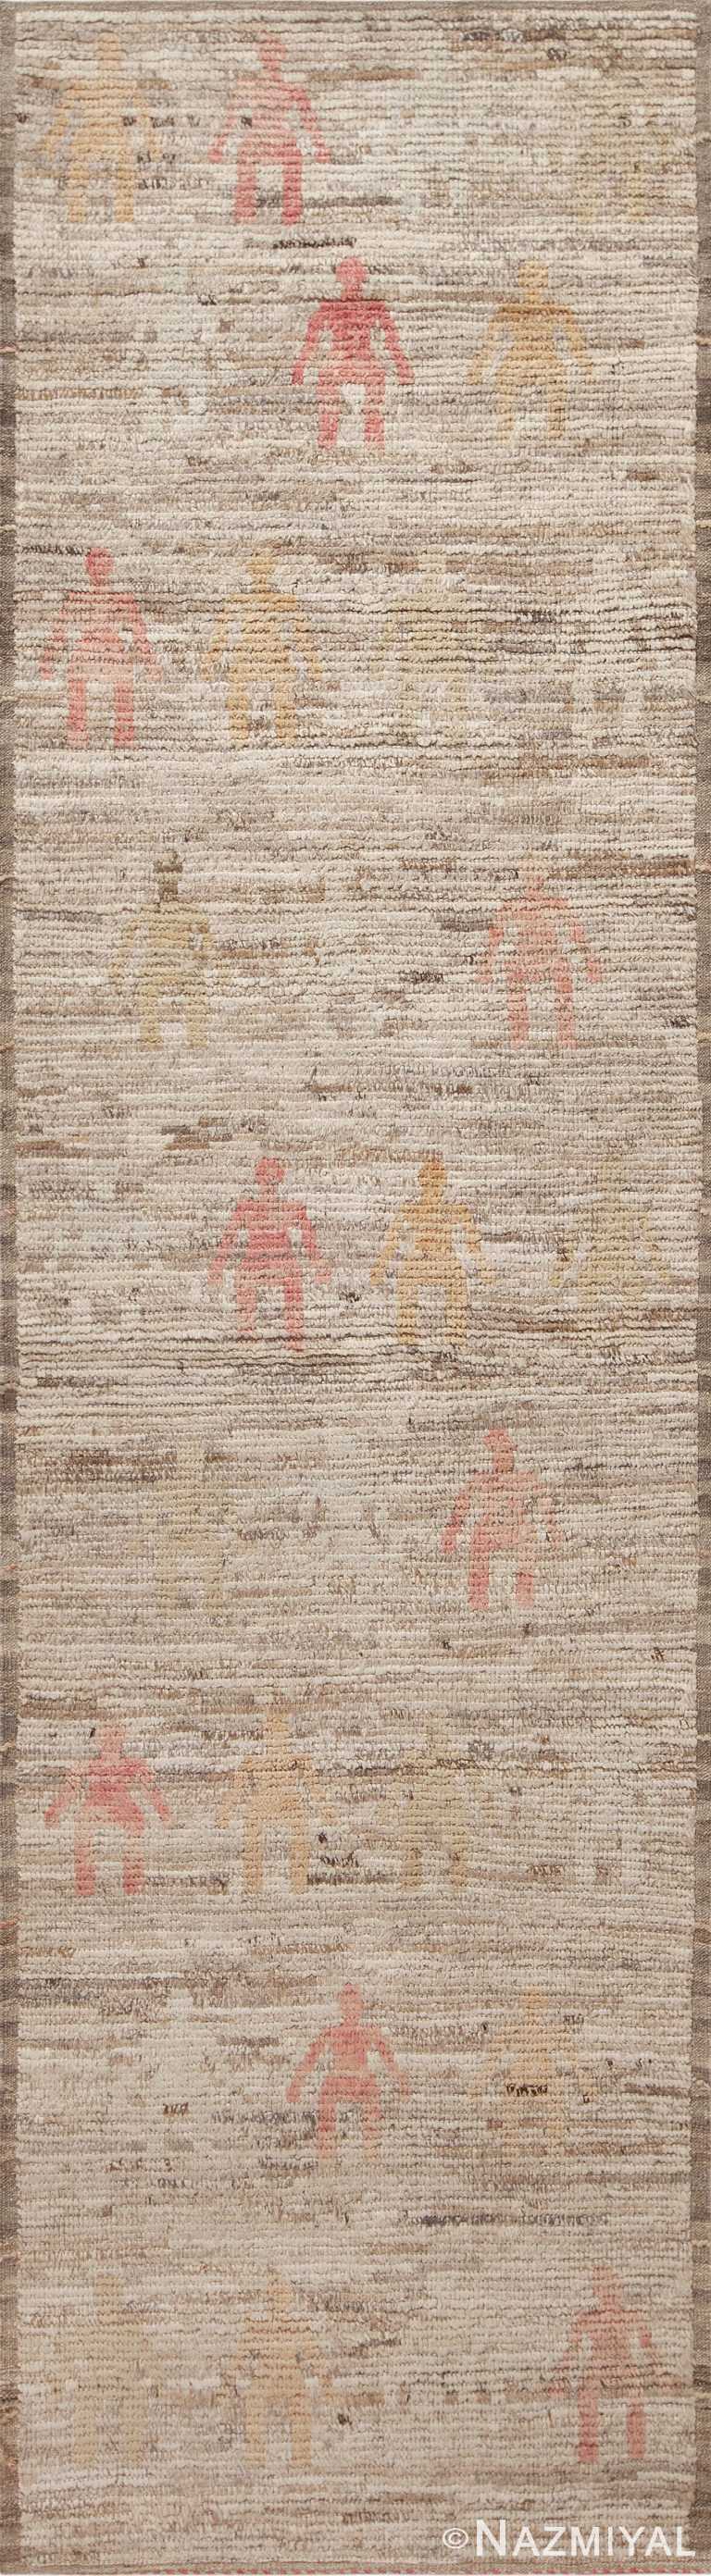 Artistic Tribal Primitive Ghotsy People Design Runner Rug 11126 by Nazmiyal Antique Rugs